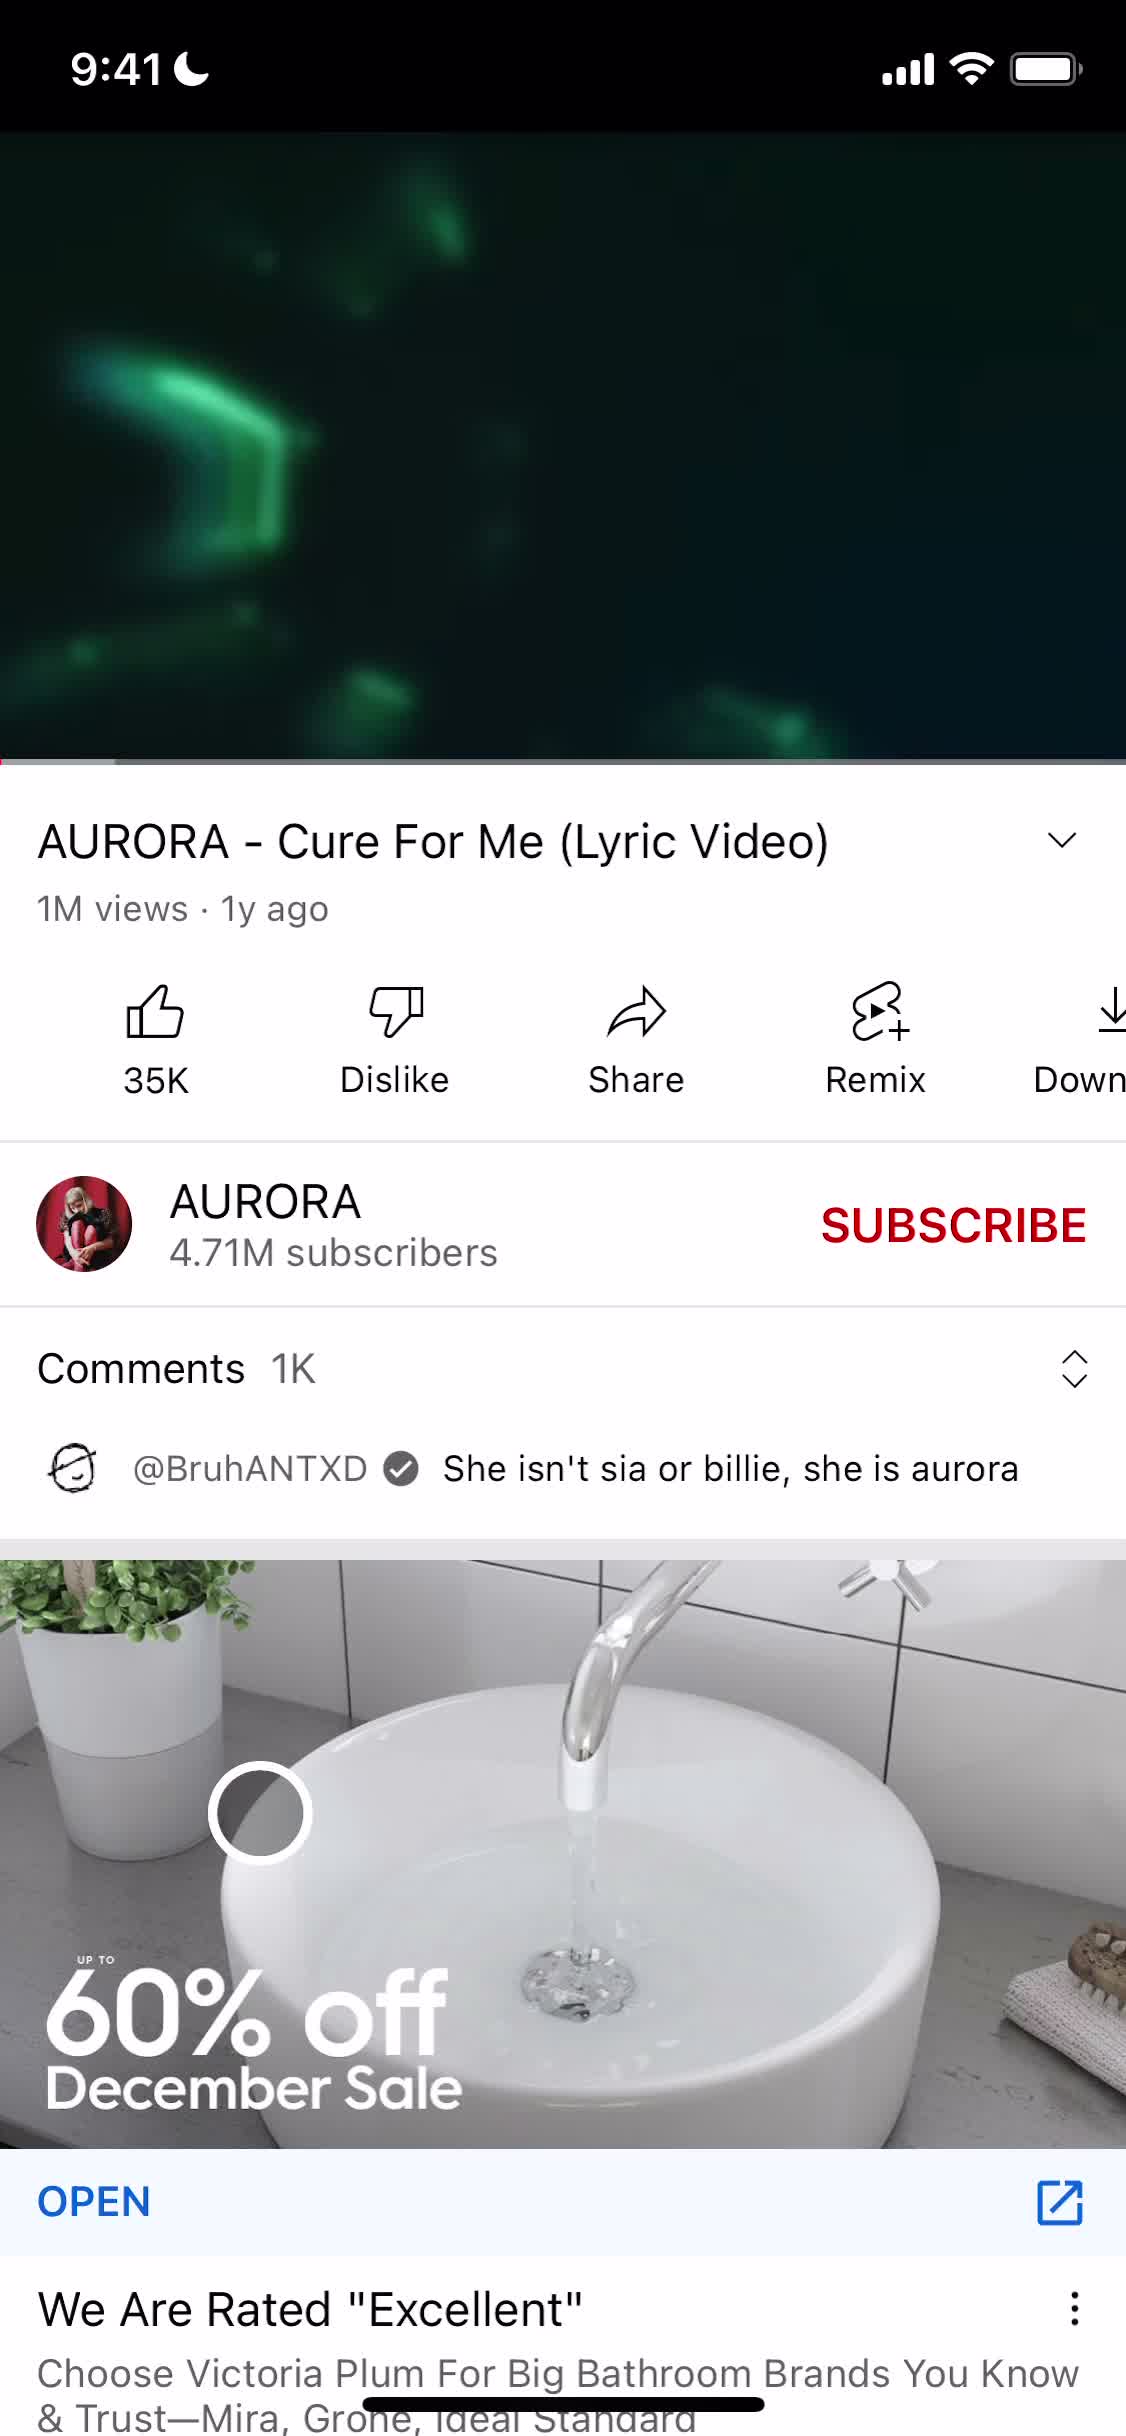 Screenshot of Video on Subscribing to a channel on YouTube user flow